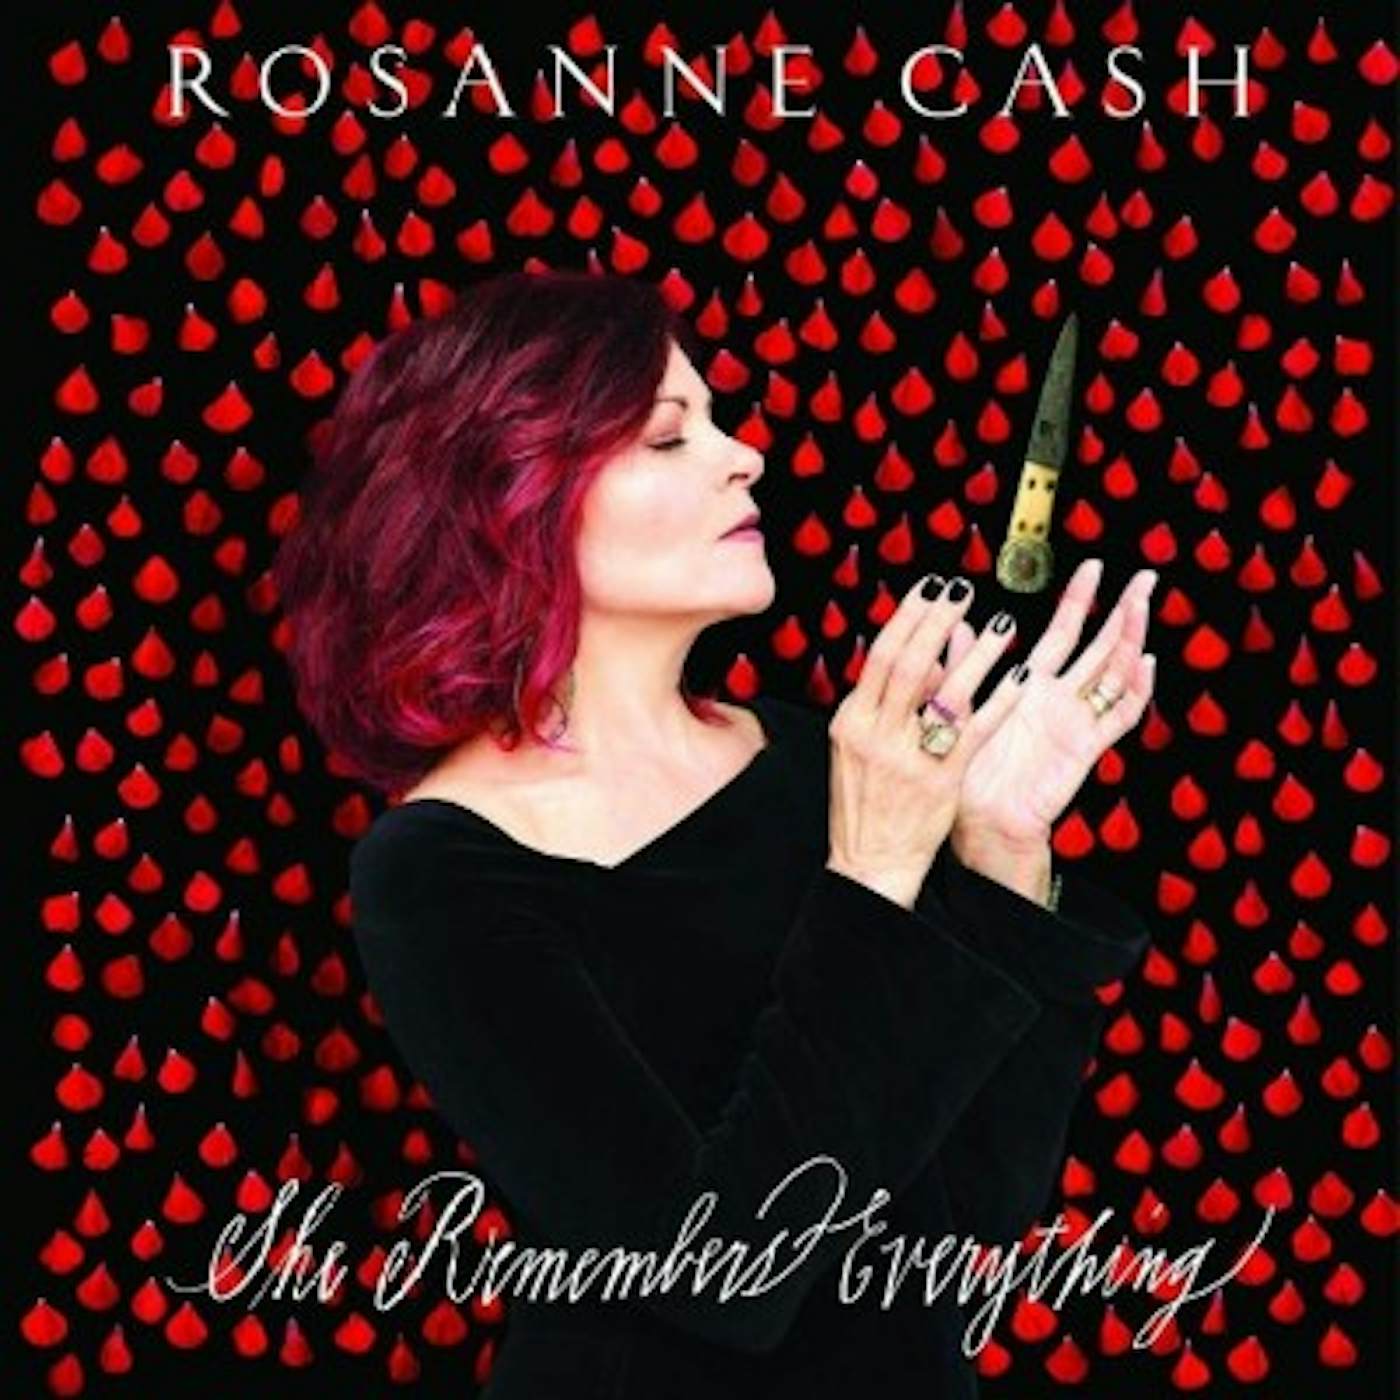 Rosanne Cash SHE REMEMBERS EVERYTHING CD